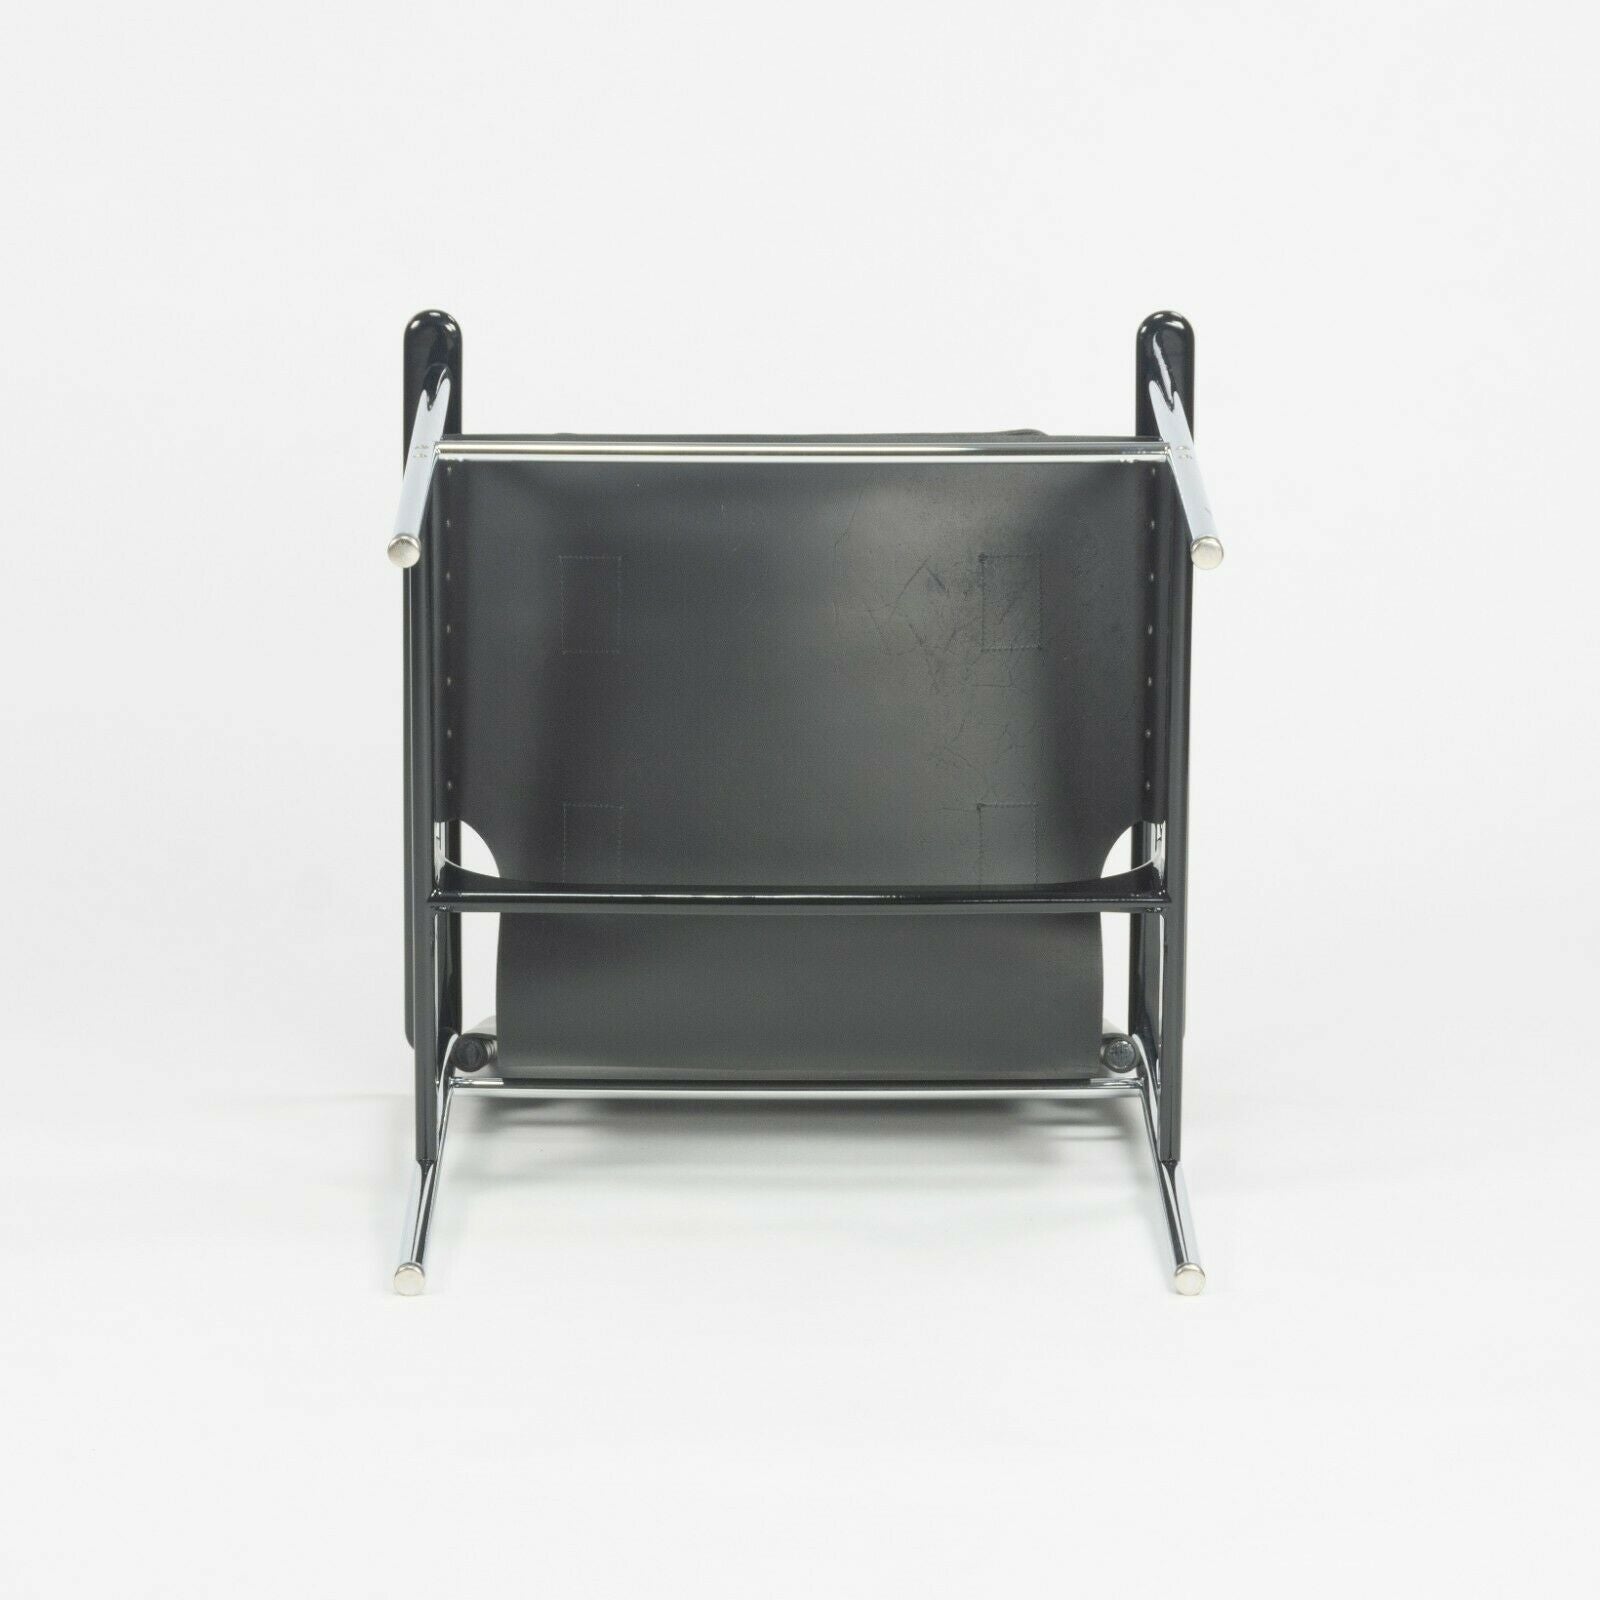 SOLD 2020 Charles Pollock for Knoll Sling Arm Chair in Black Leather and Chrome # 657